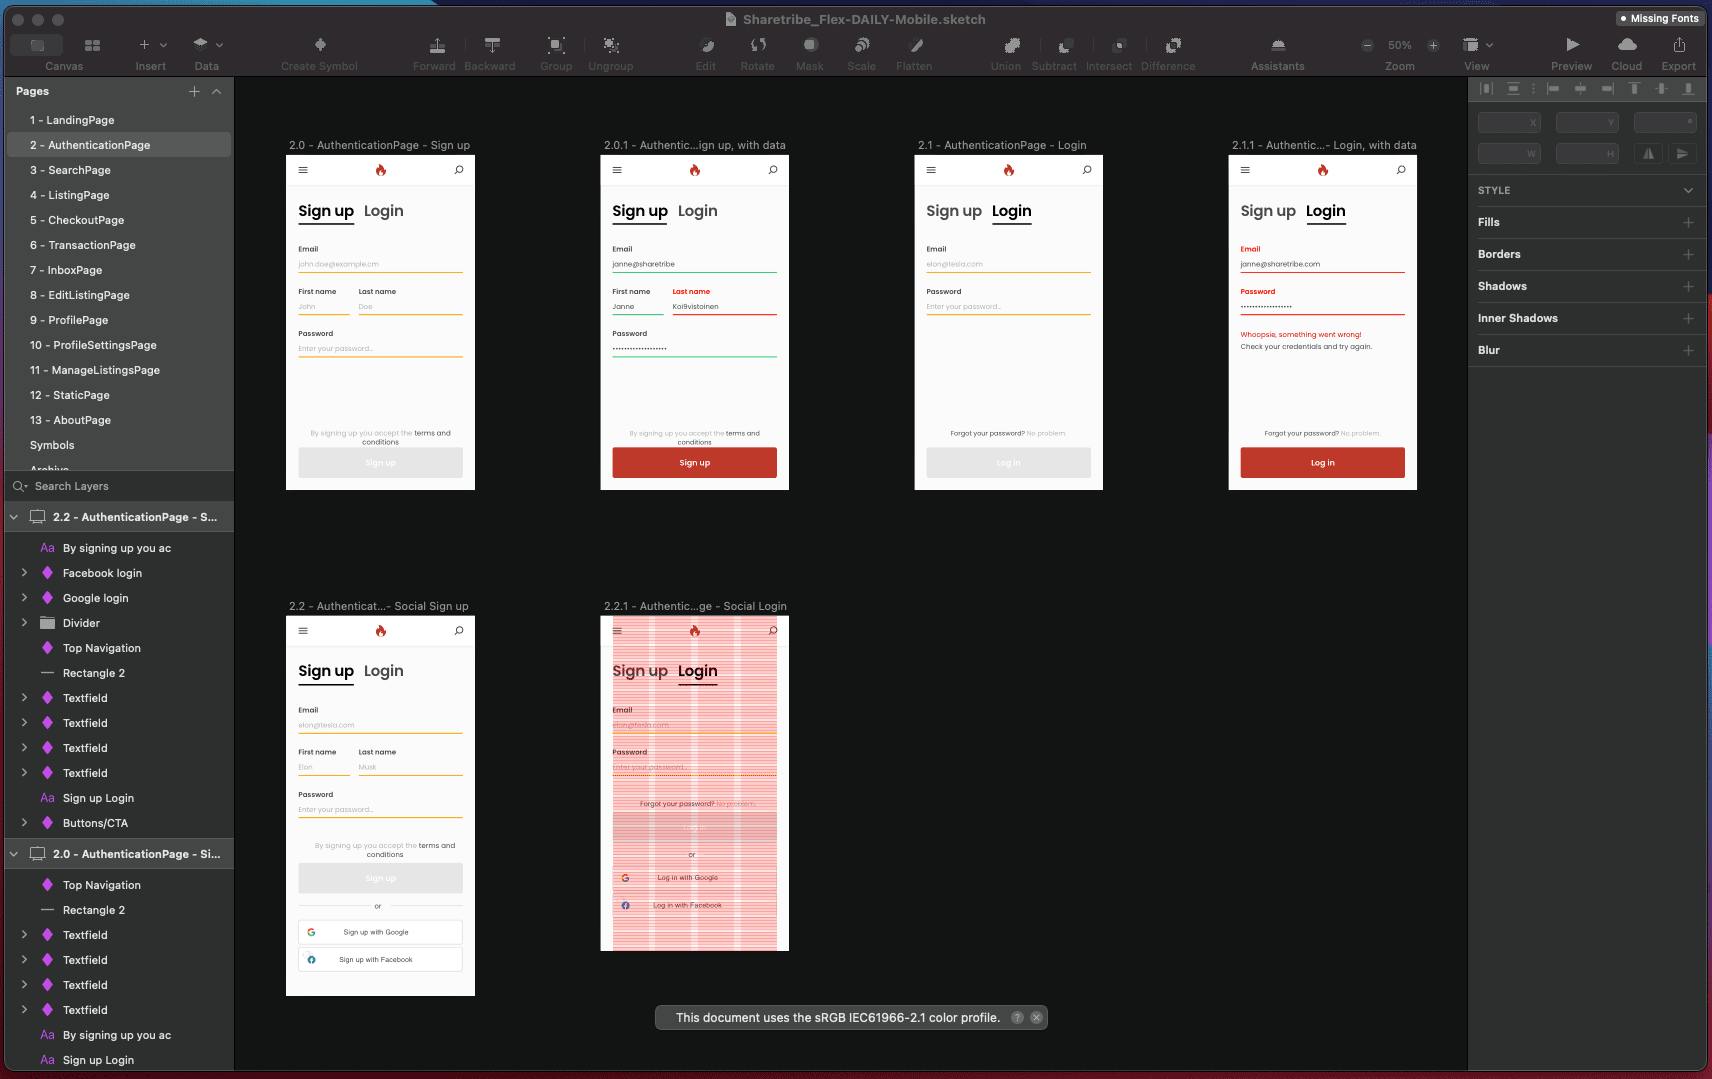 Screenshot of the design application Sketch with layouts for a mobile marketplace UI.